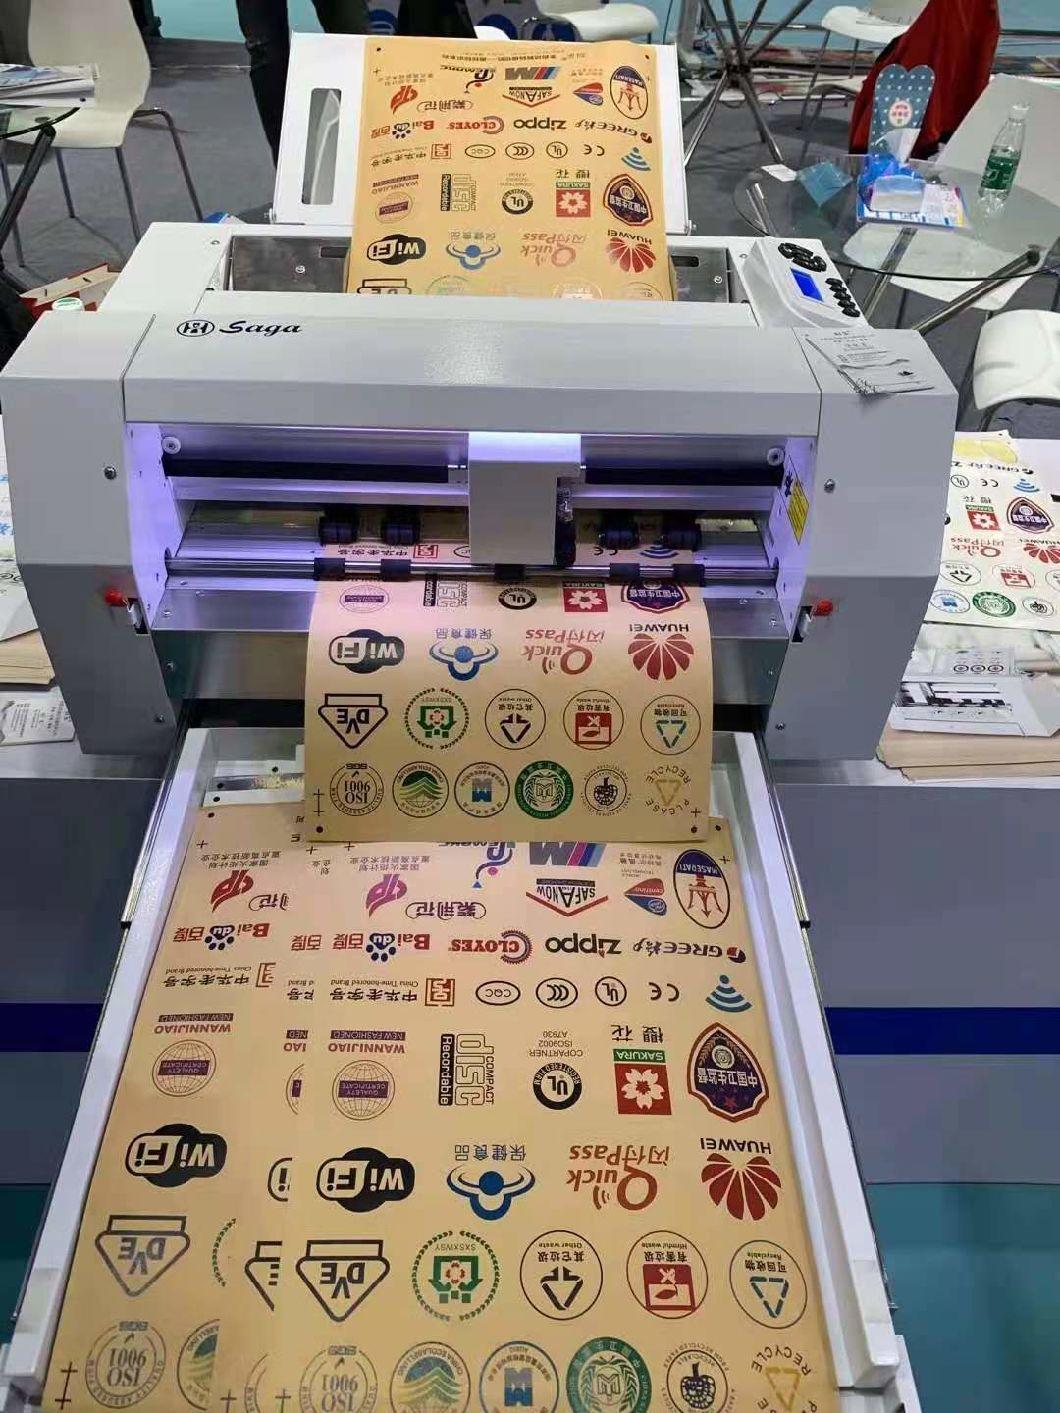 Automatic Sheet to Sheet CCD Camera Vinyl Die Cutter for Cutting Sticker Papers